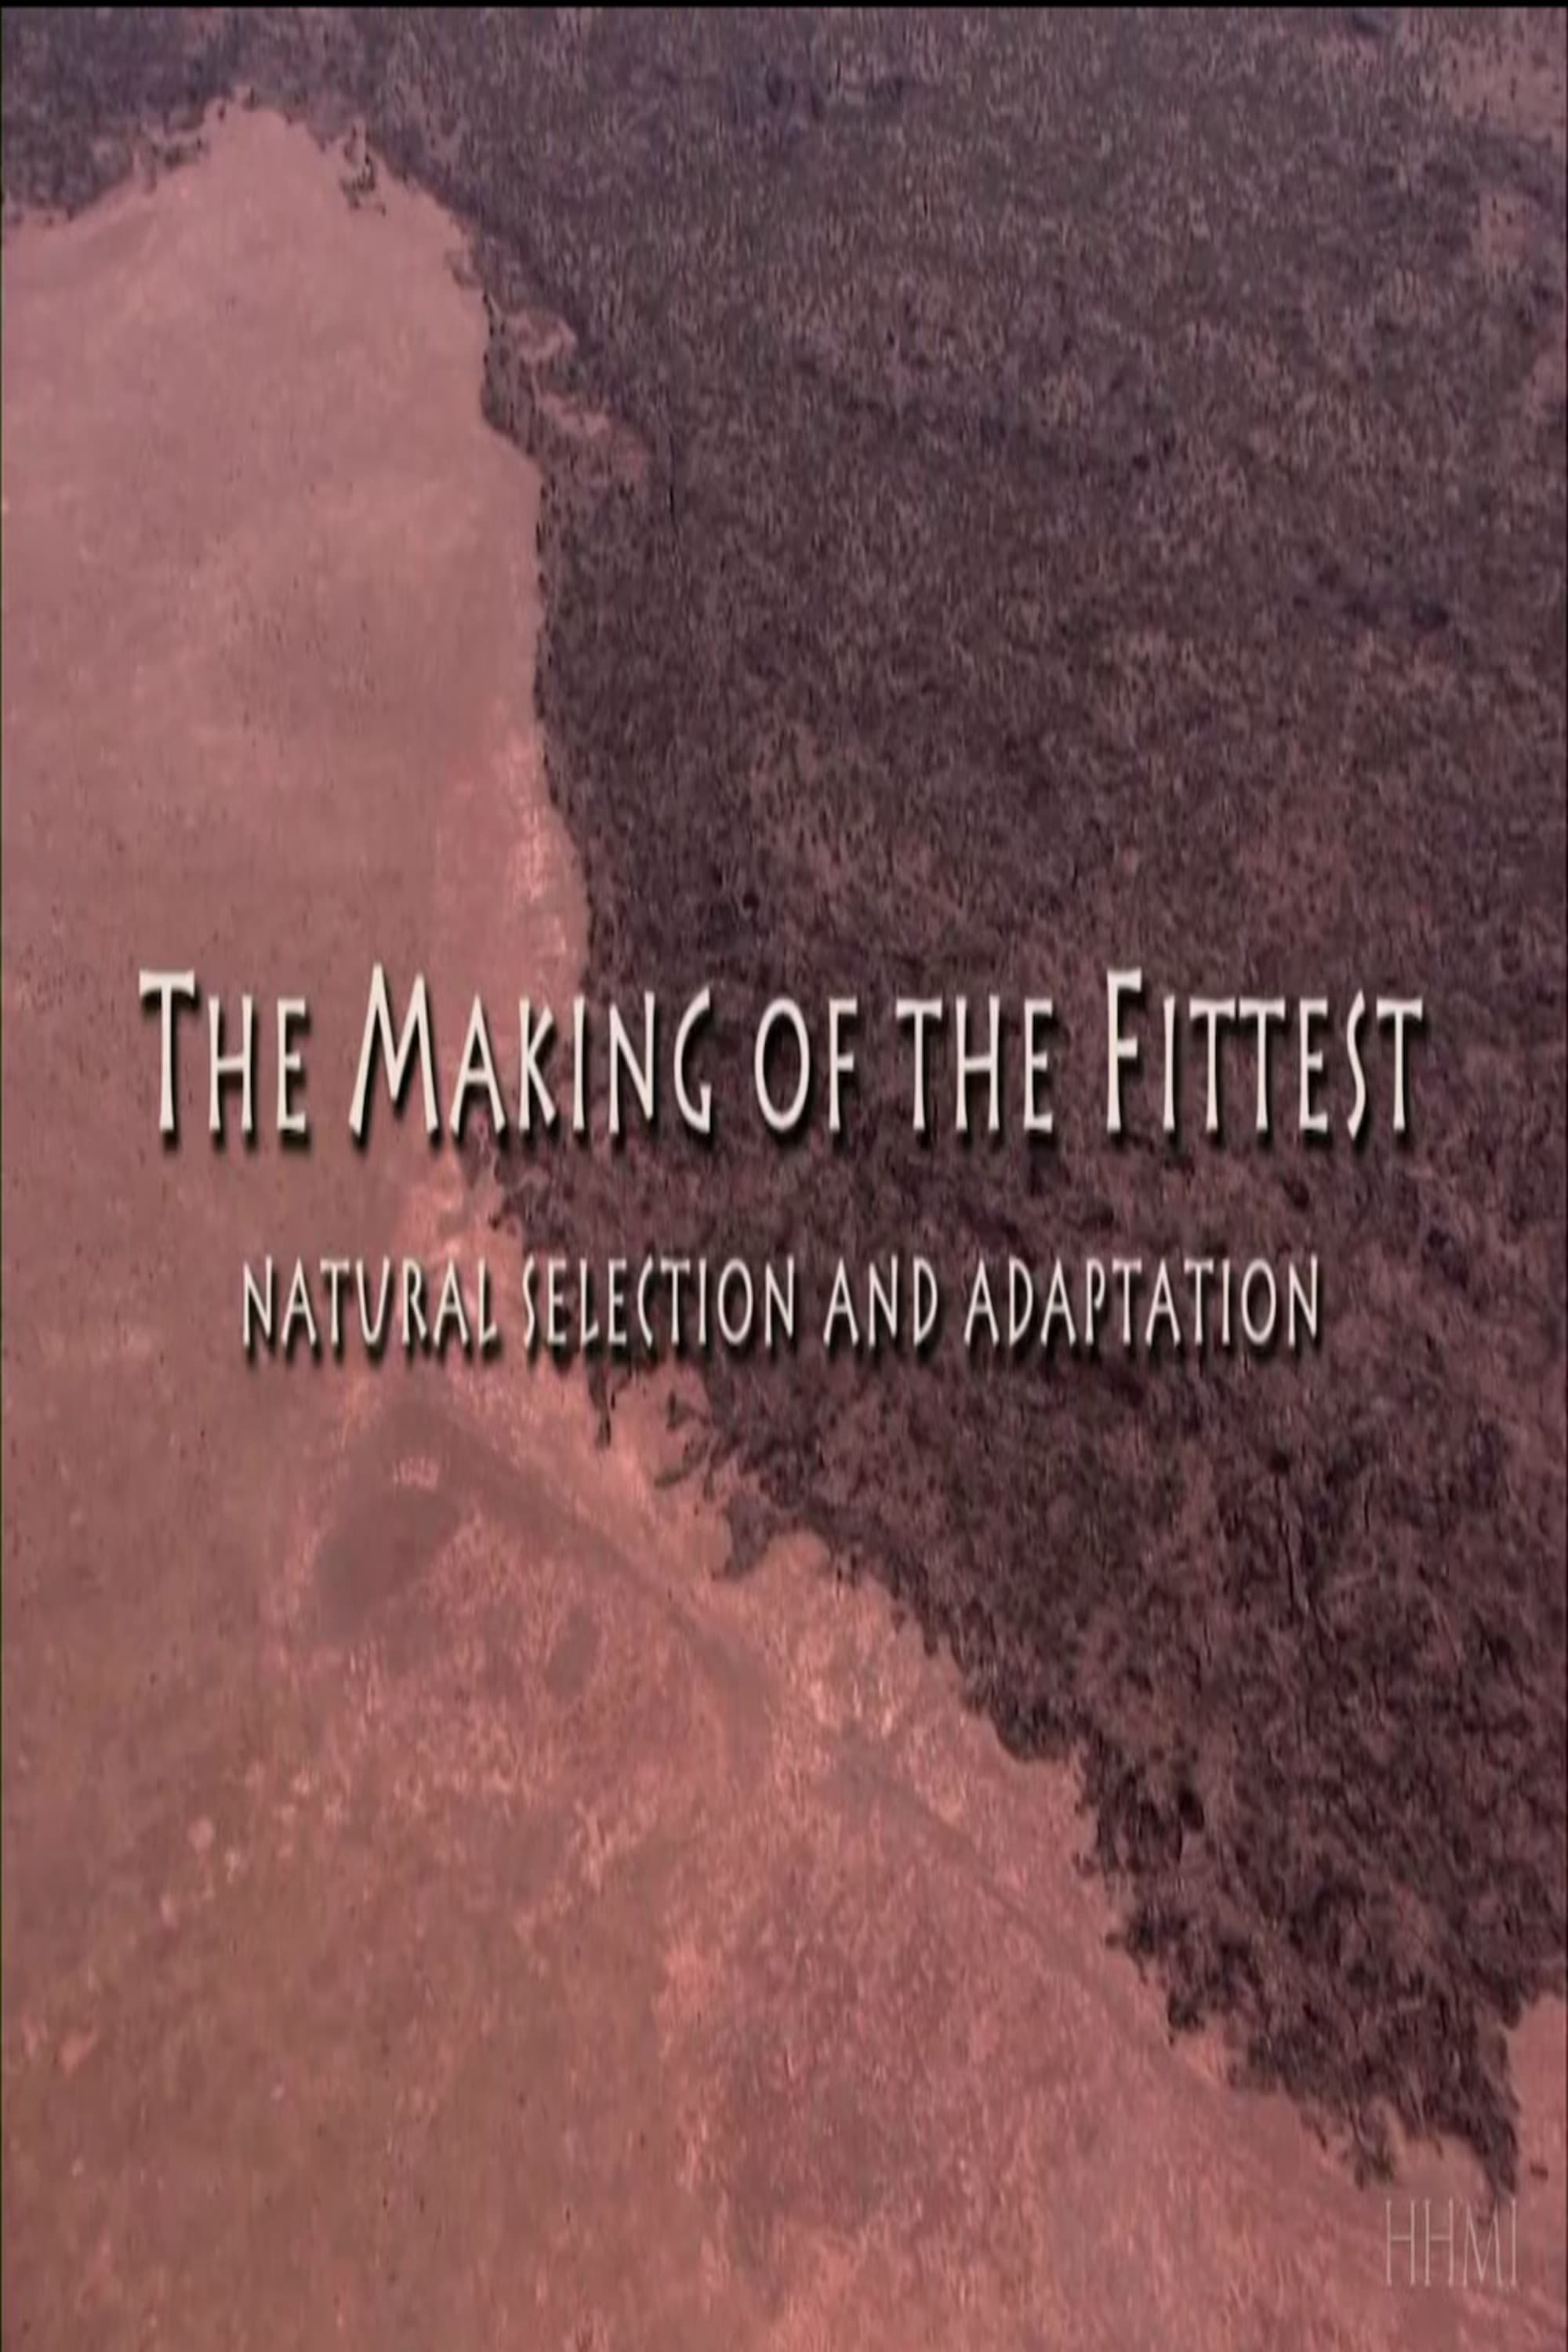 The Making of the Fittest: Natural Selection and Adaptation